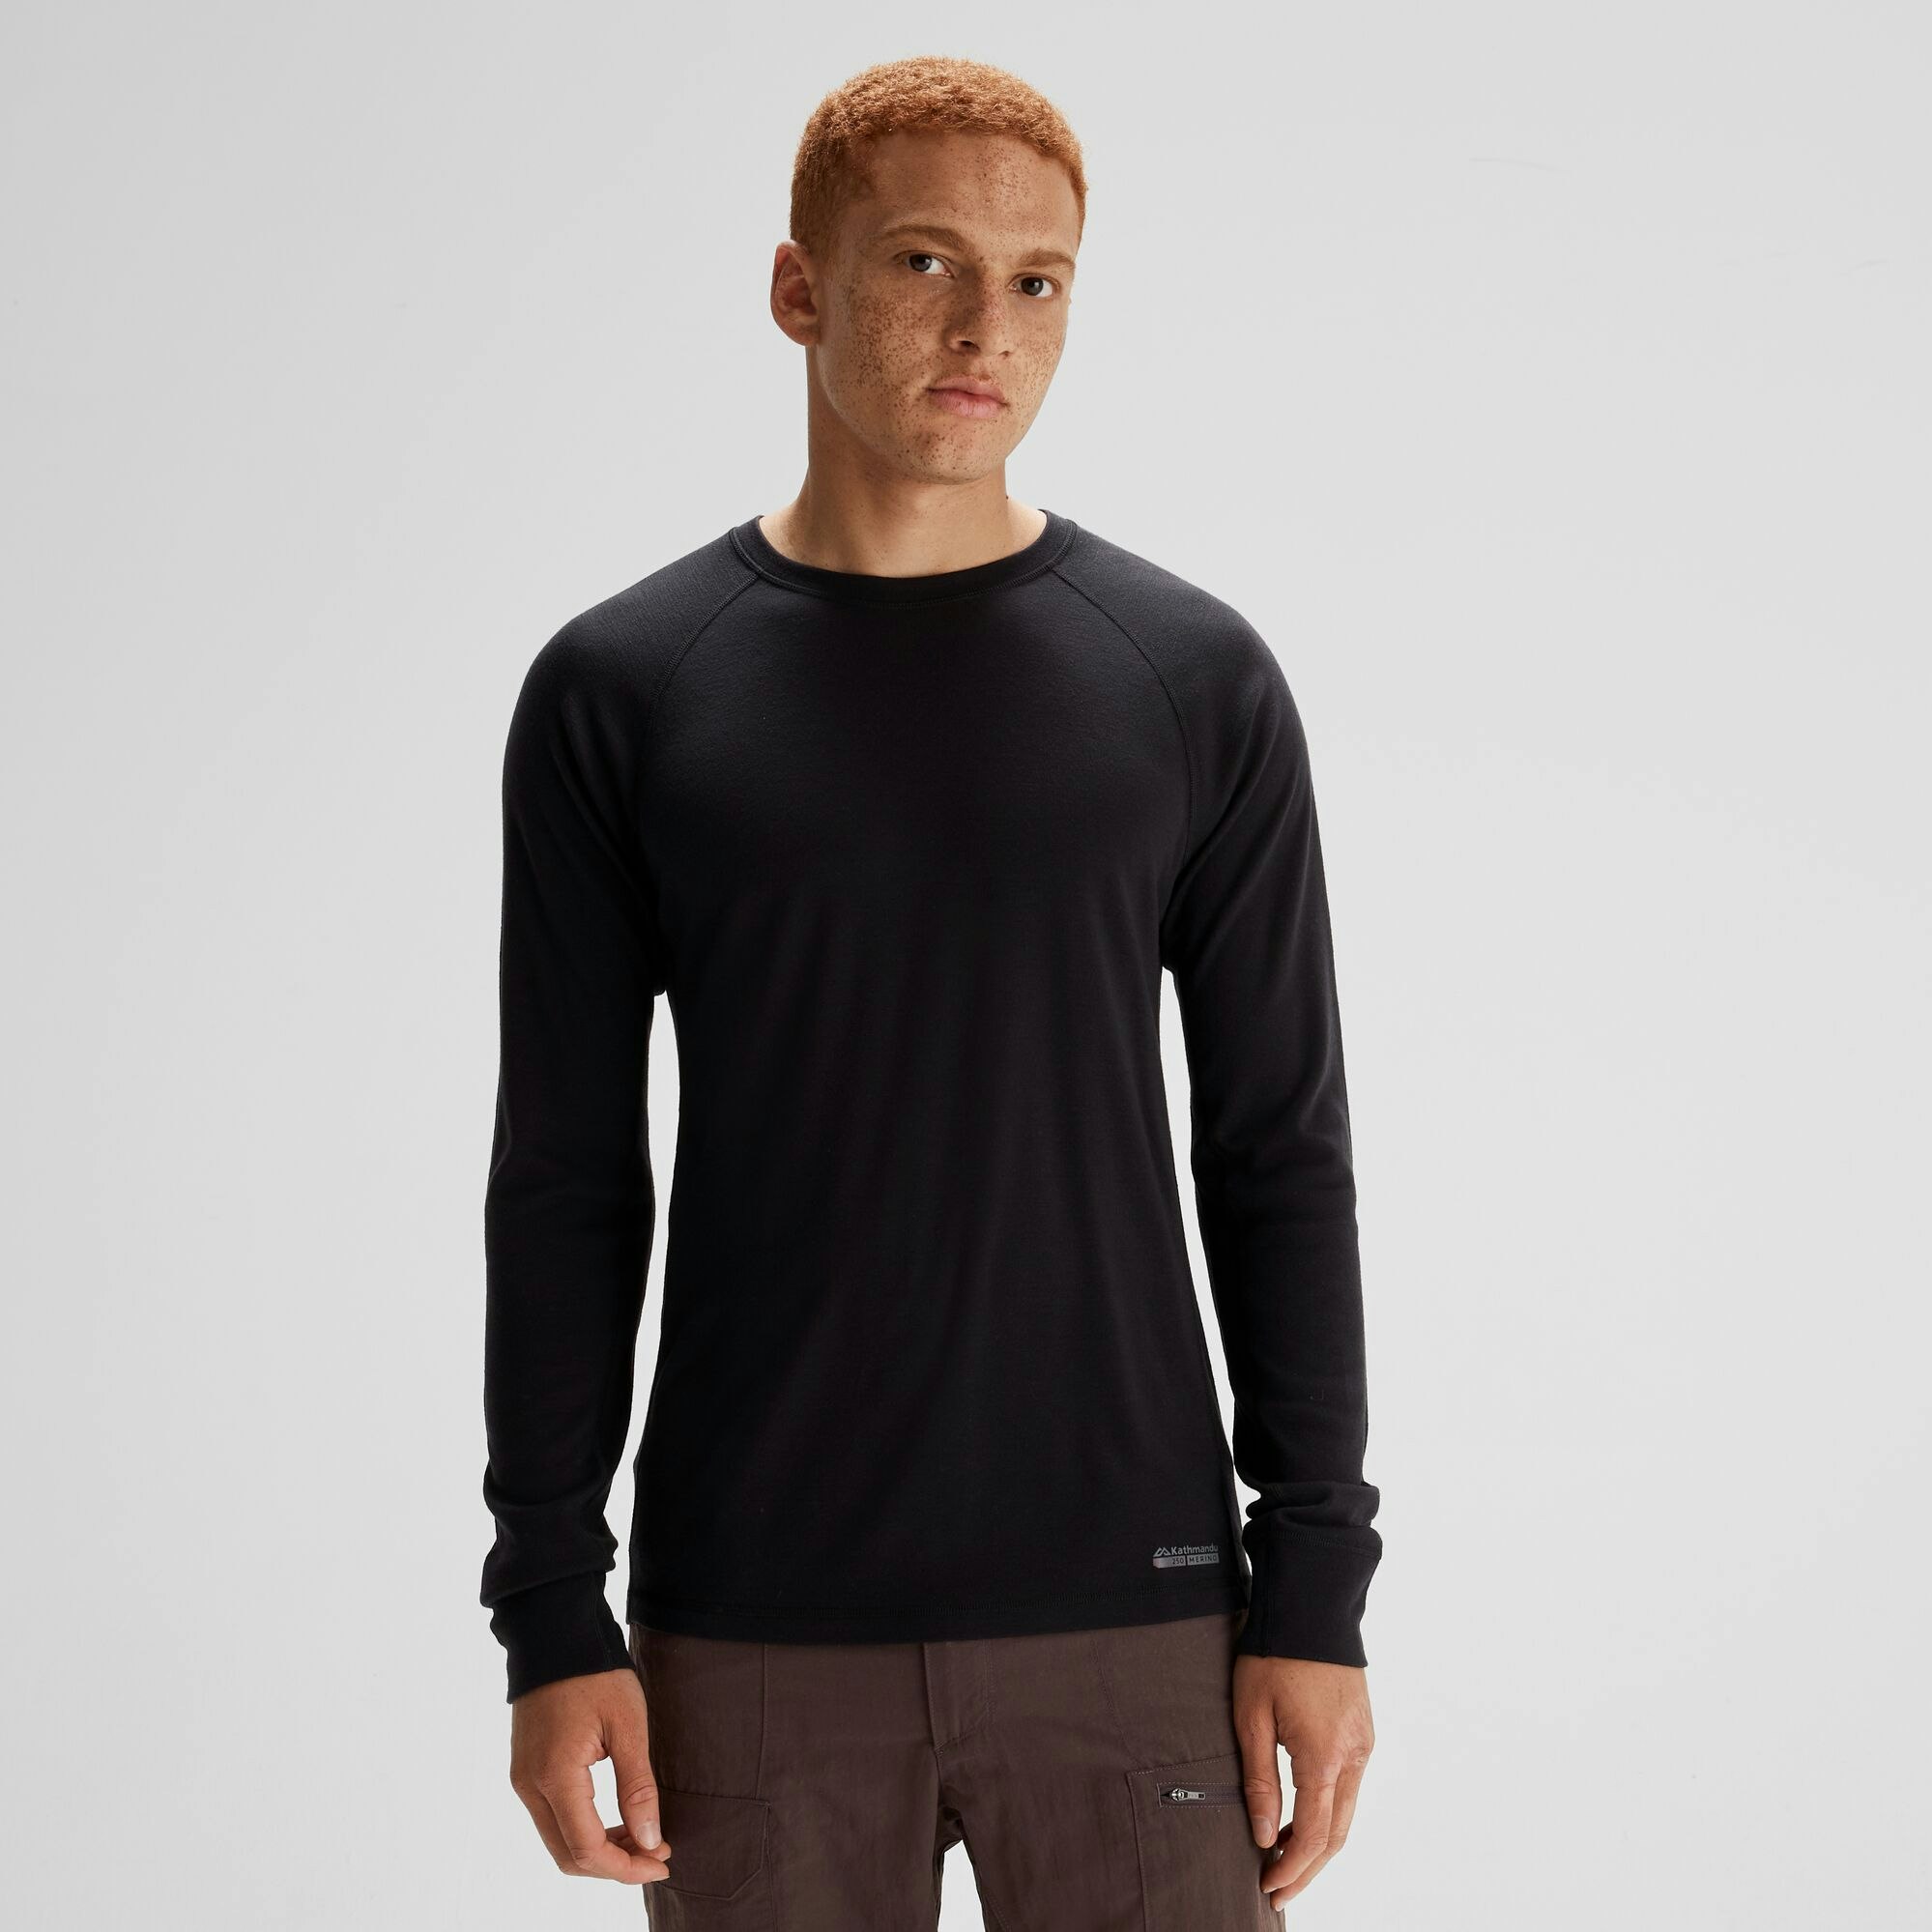 KMDAscent Quick-Drying Odour-Control Men Baselayer Long Sleeve Top by  Kathmandu Online, THE ICONIC